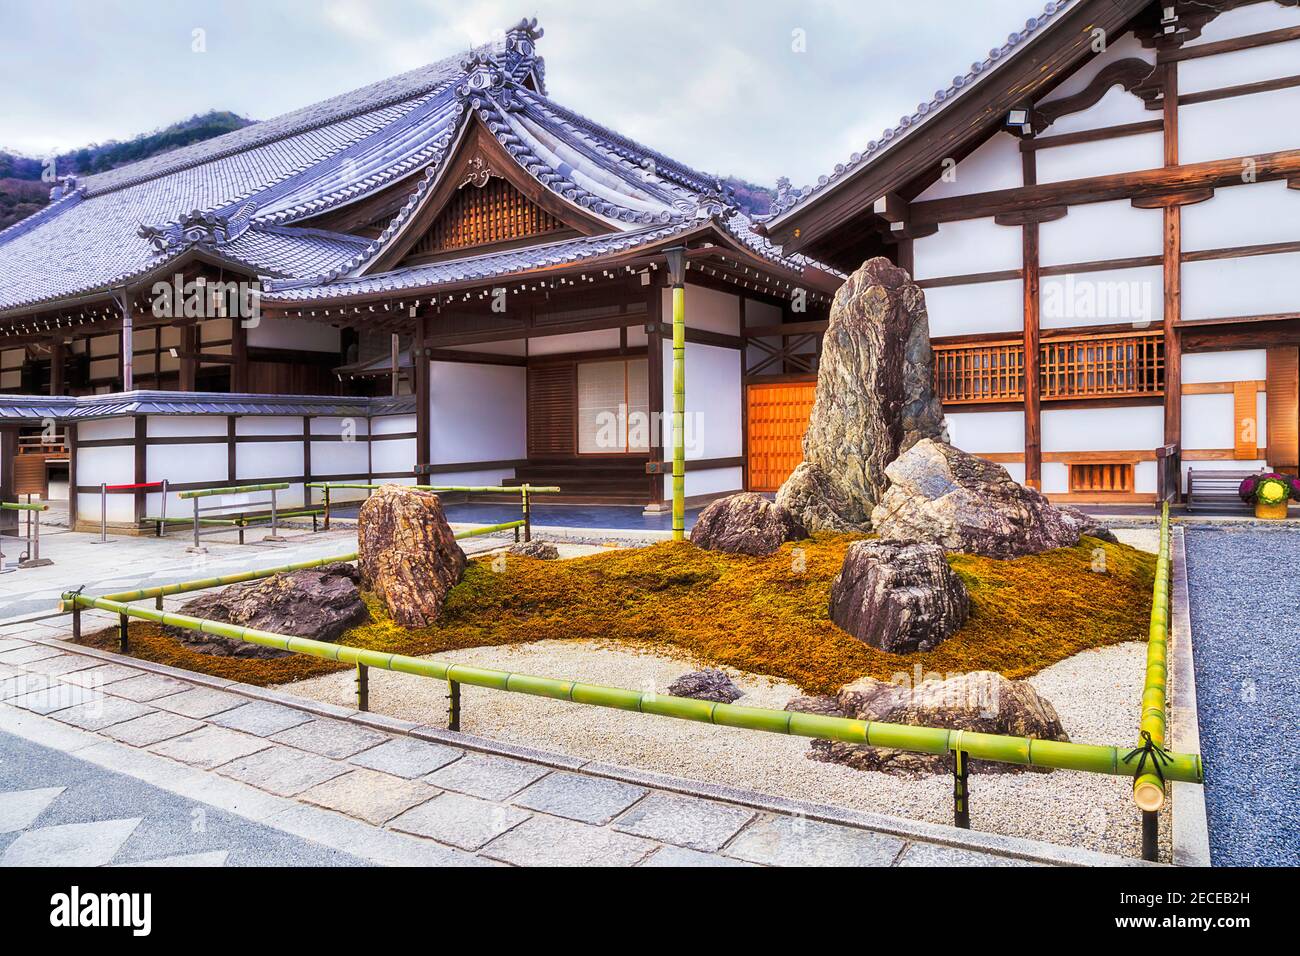 Stone garden at the entrance to traditional Japanese Buddhist temple in ancient city Kyoto. Stock Photo